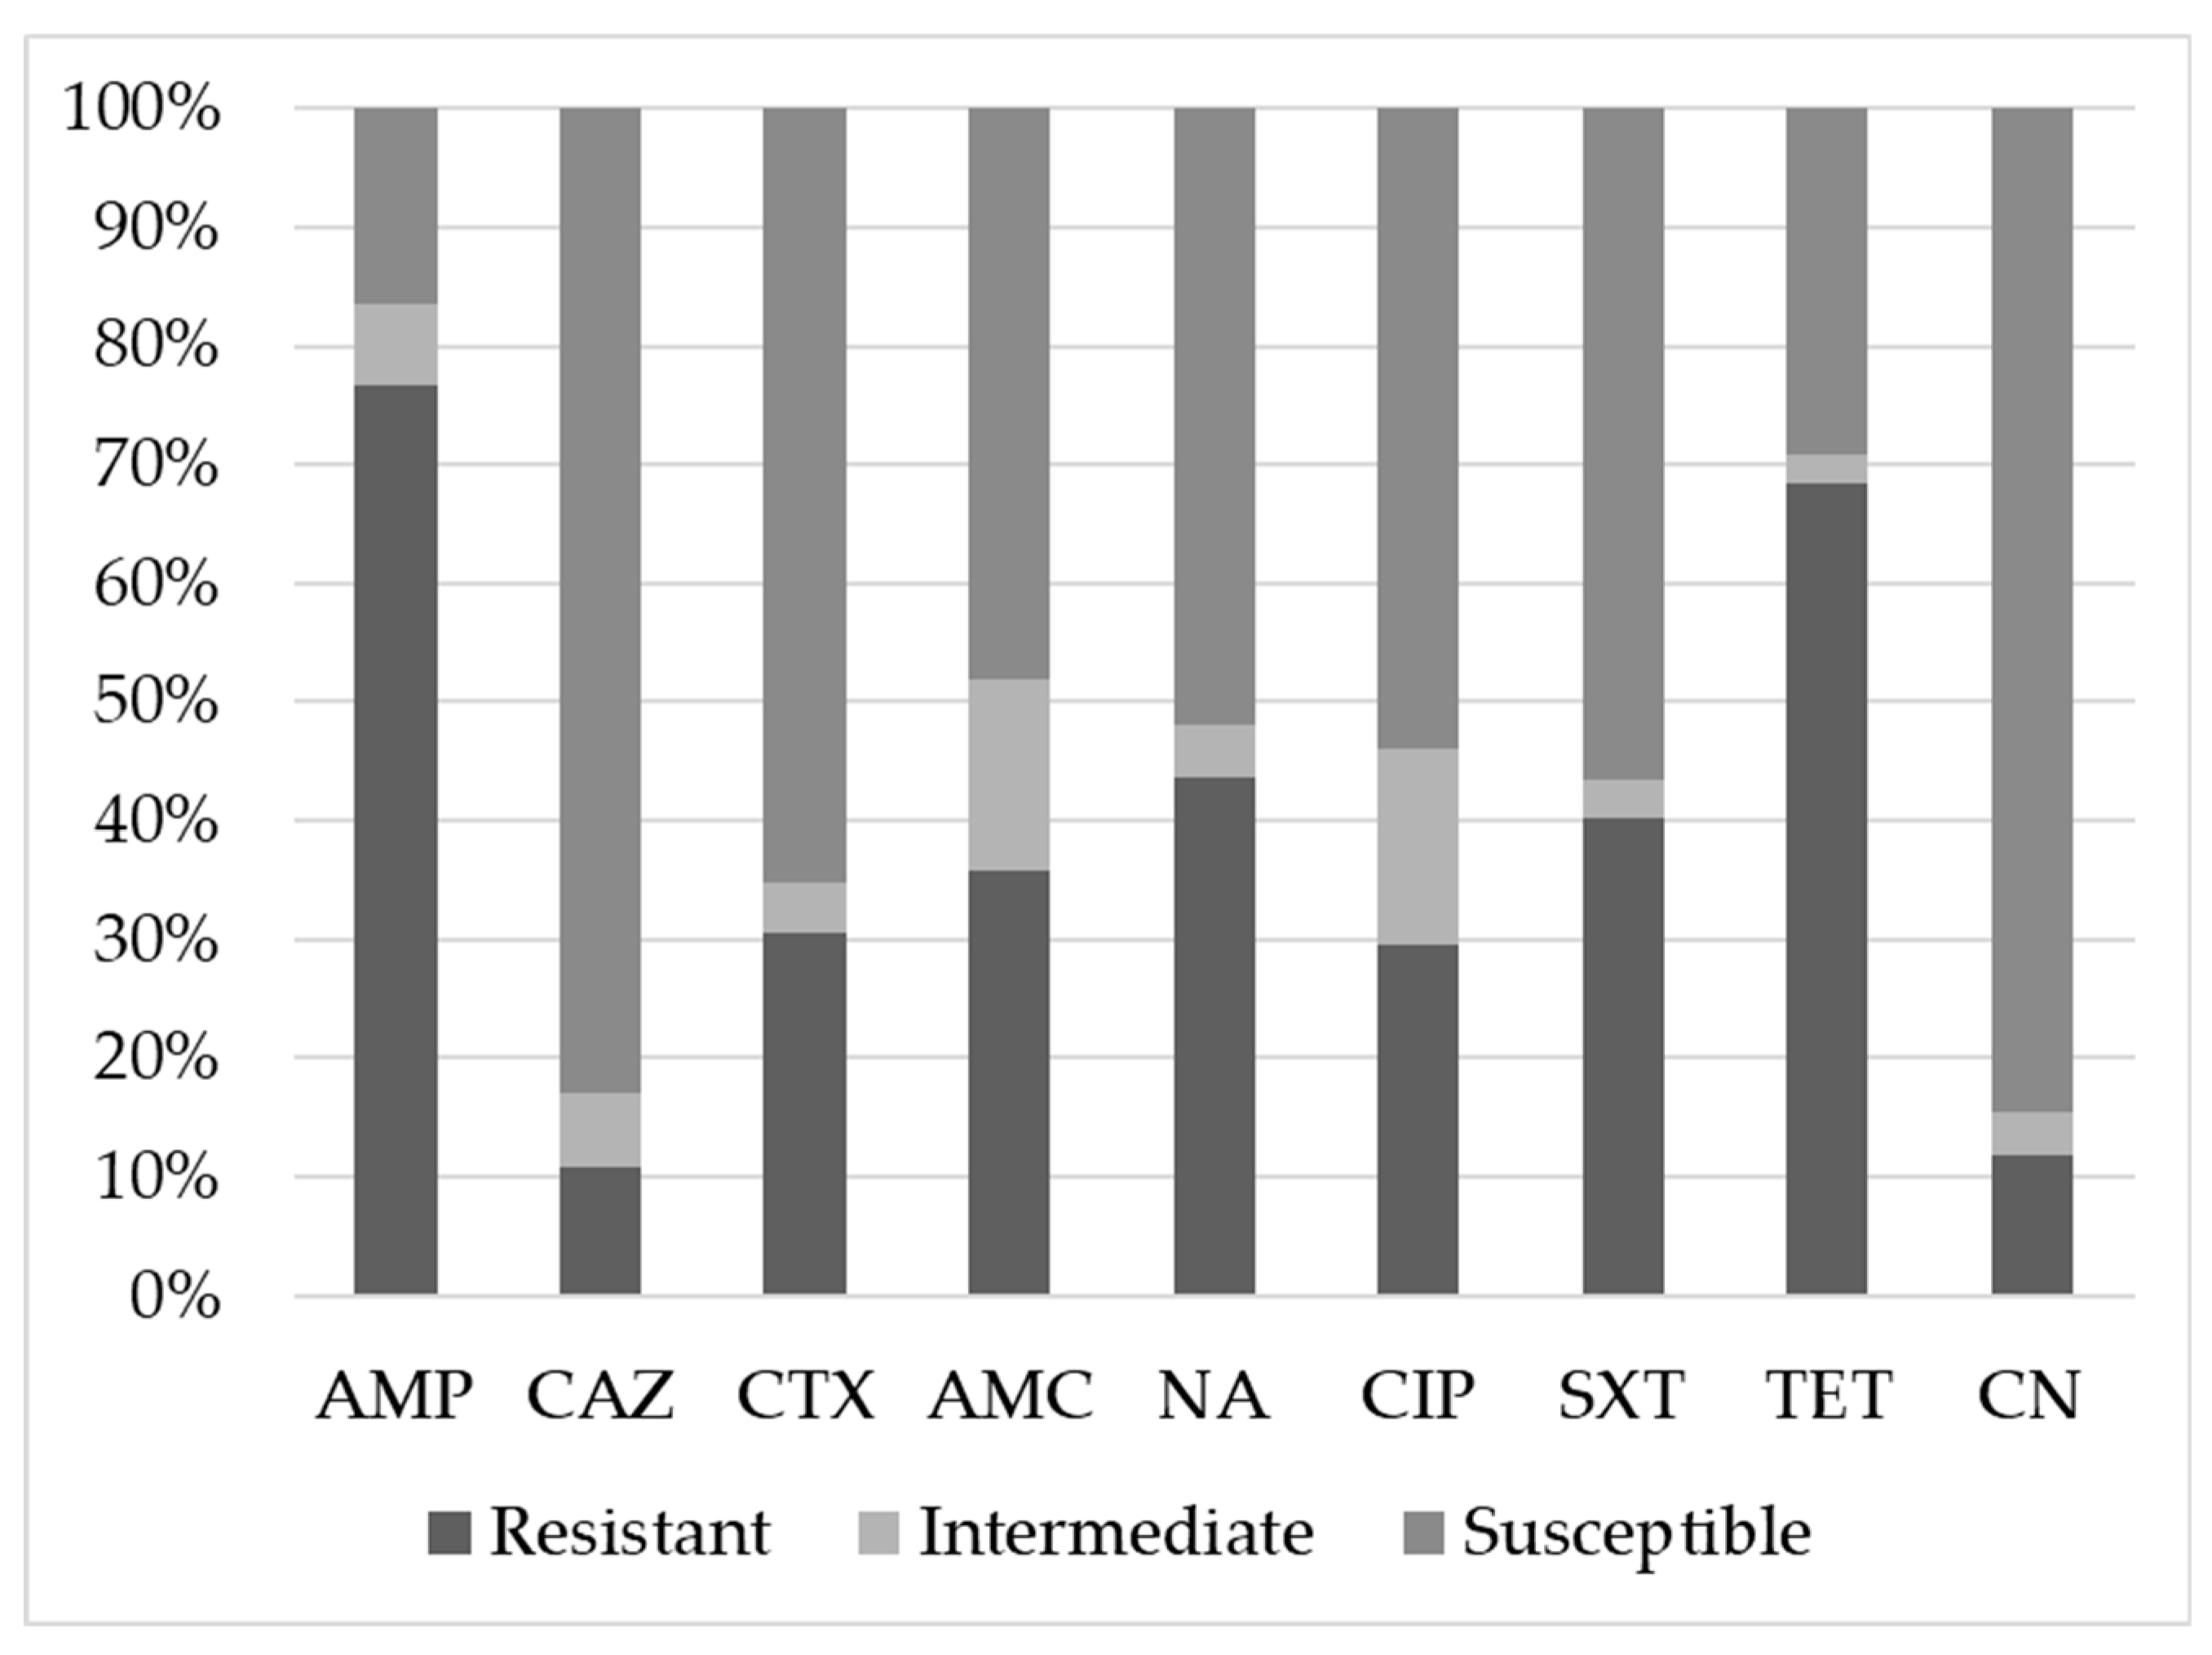 Animals | Free Full-Text | Antimicrobial Susceptibility of Escherichia coli  and ESBL-Producing Escherichia coli Diffusion in Conventional, Organic and  Antibiotic-Free Meat Chickens at Slaughter | HTML